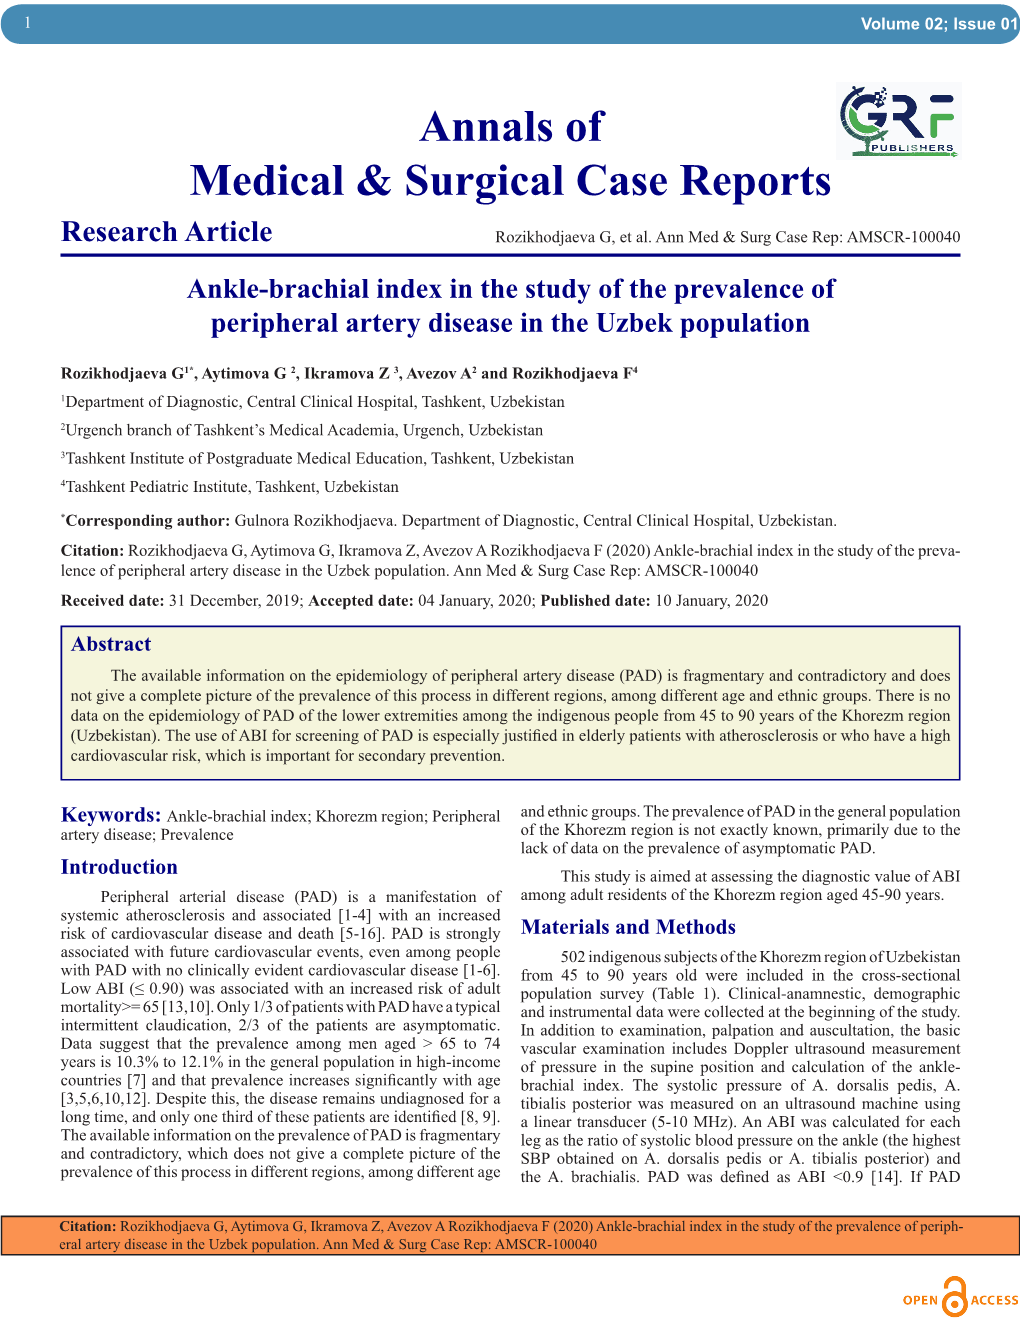 Annals of Medical & Surgical Case Reports